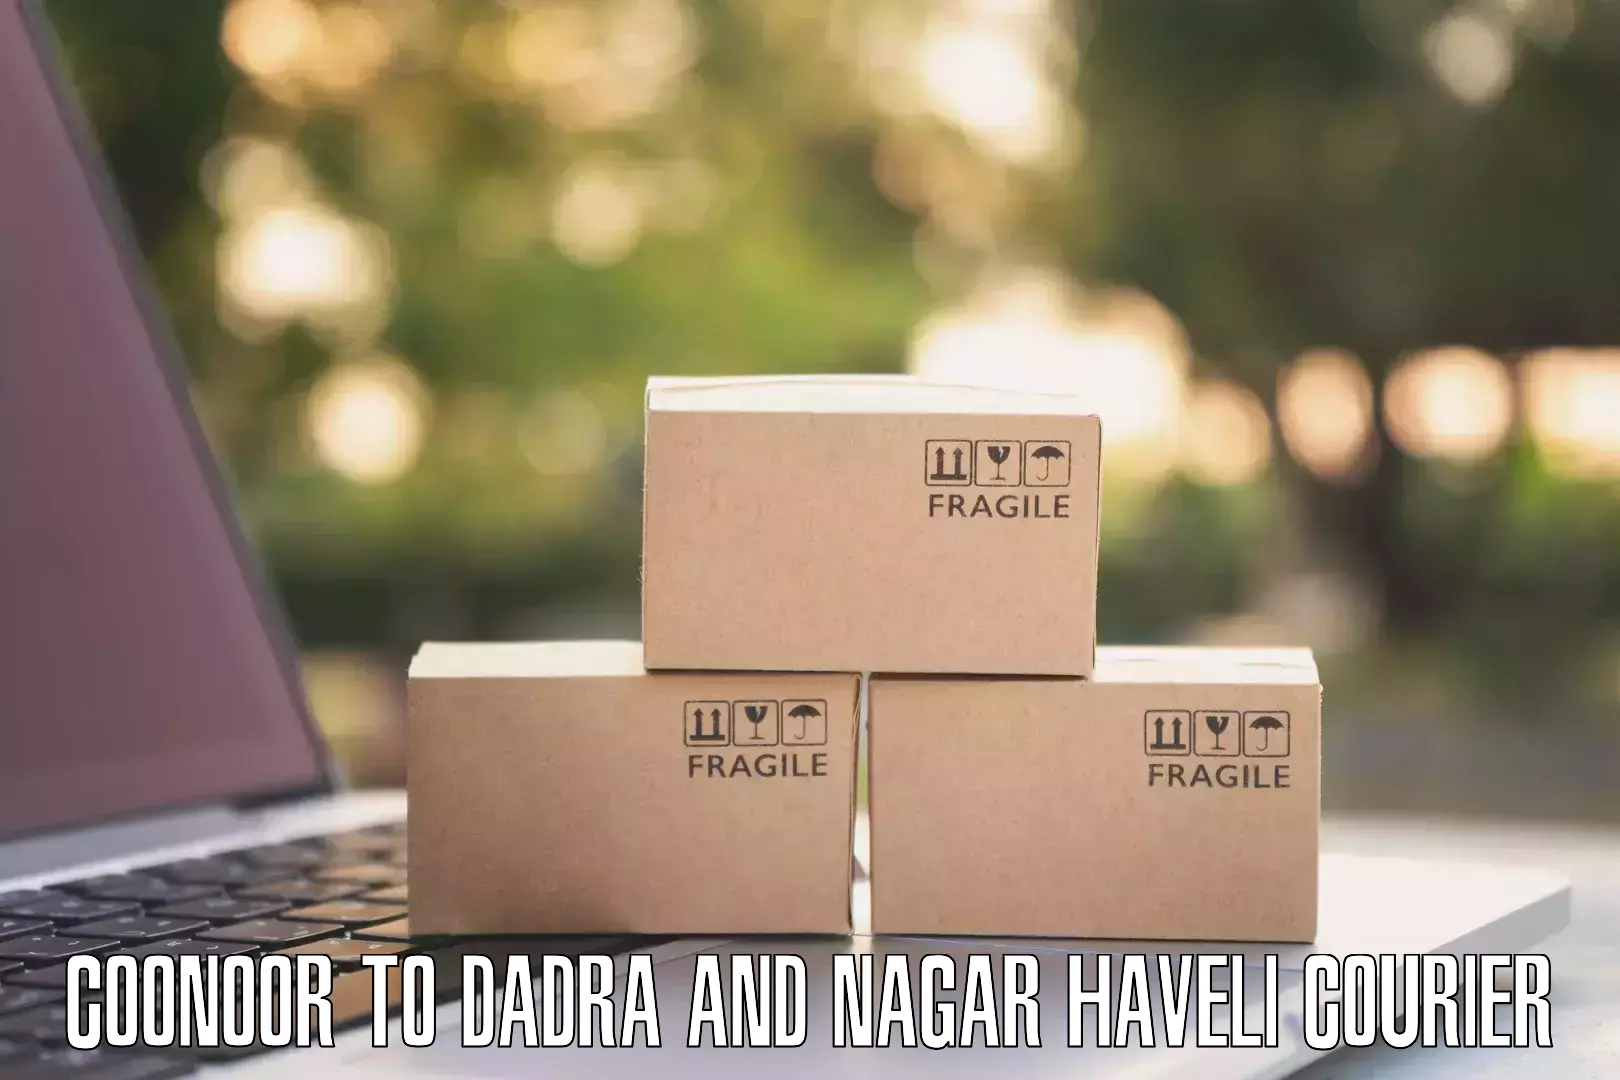 Express package delivery Coonoor to Dadra and Nagar Haveli